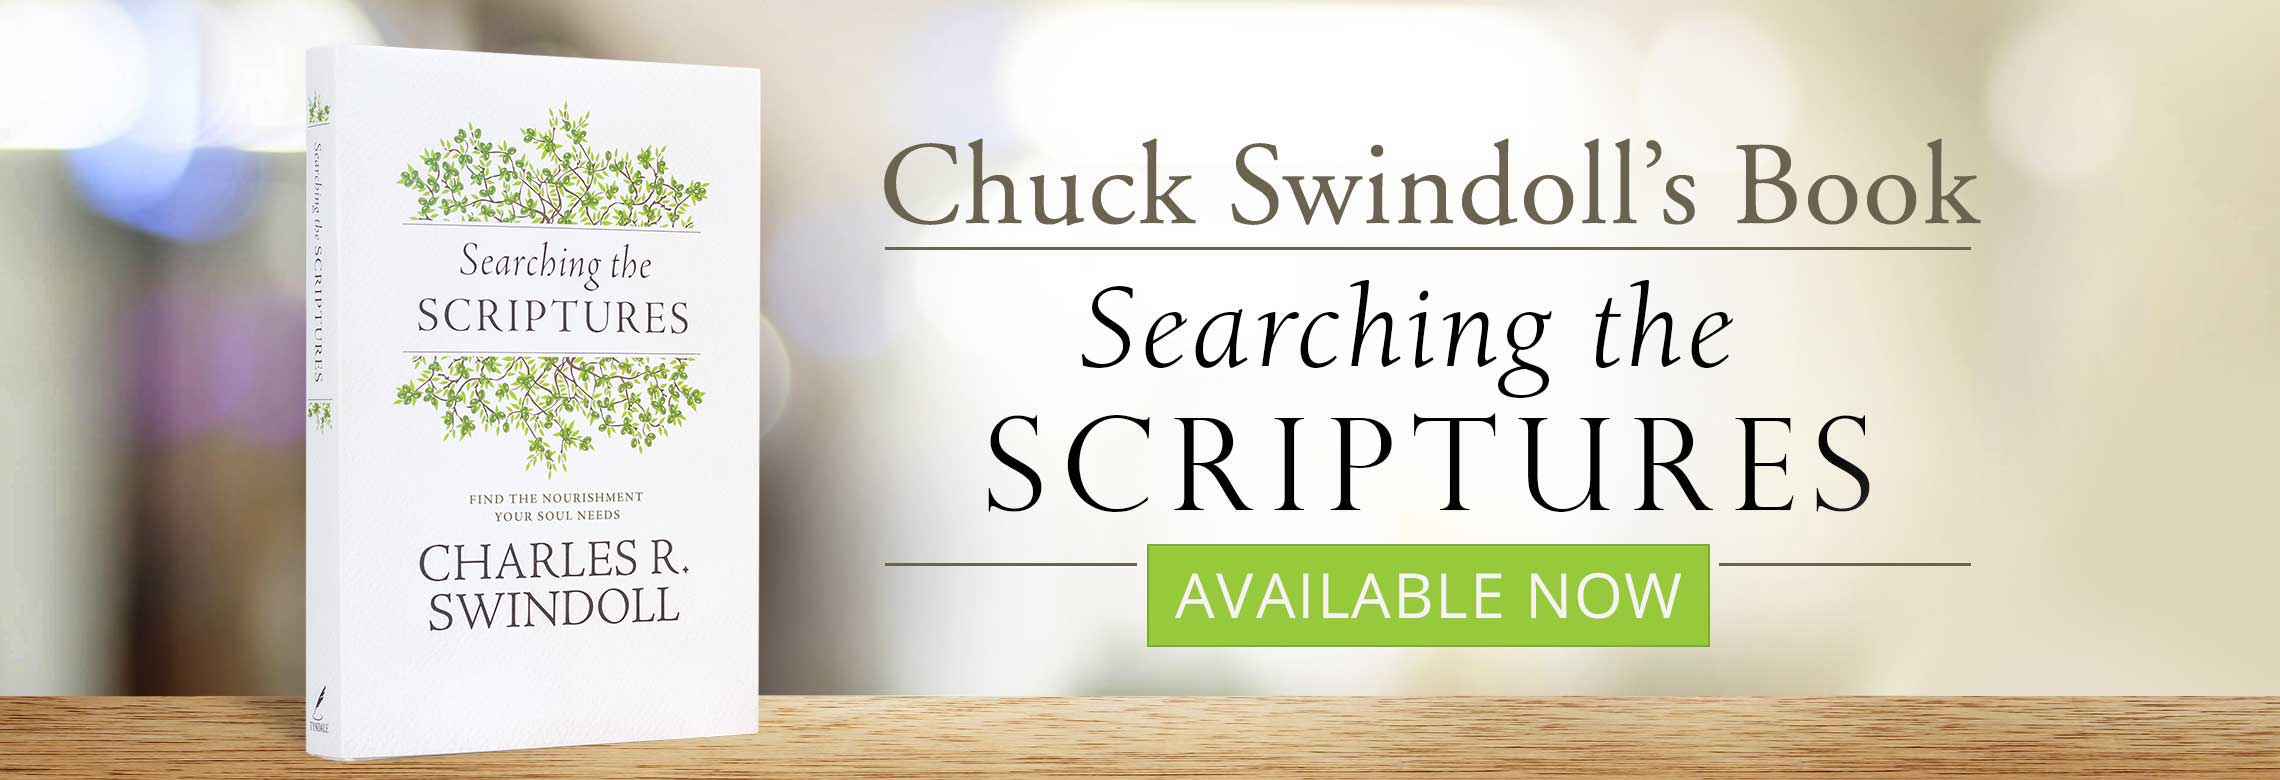 Available Now: Chuck Swindoll's new book: Searching the Scriptures